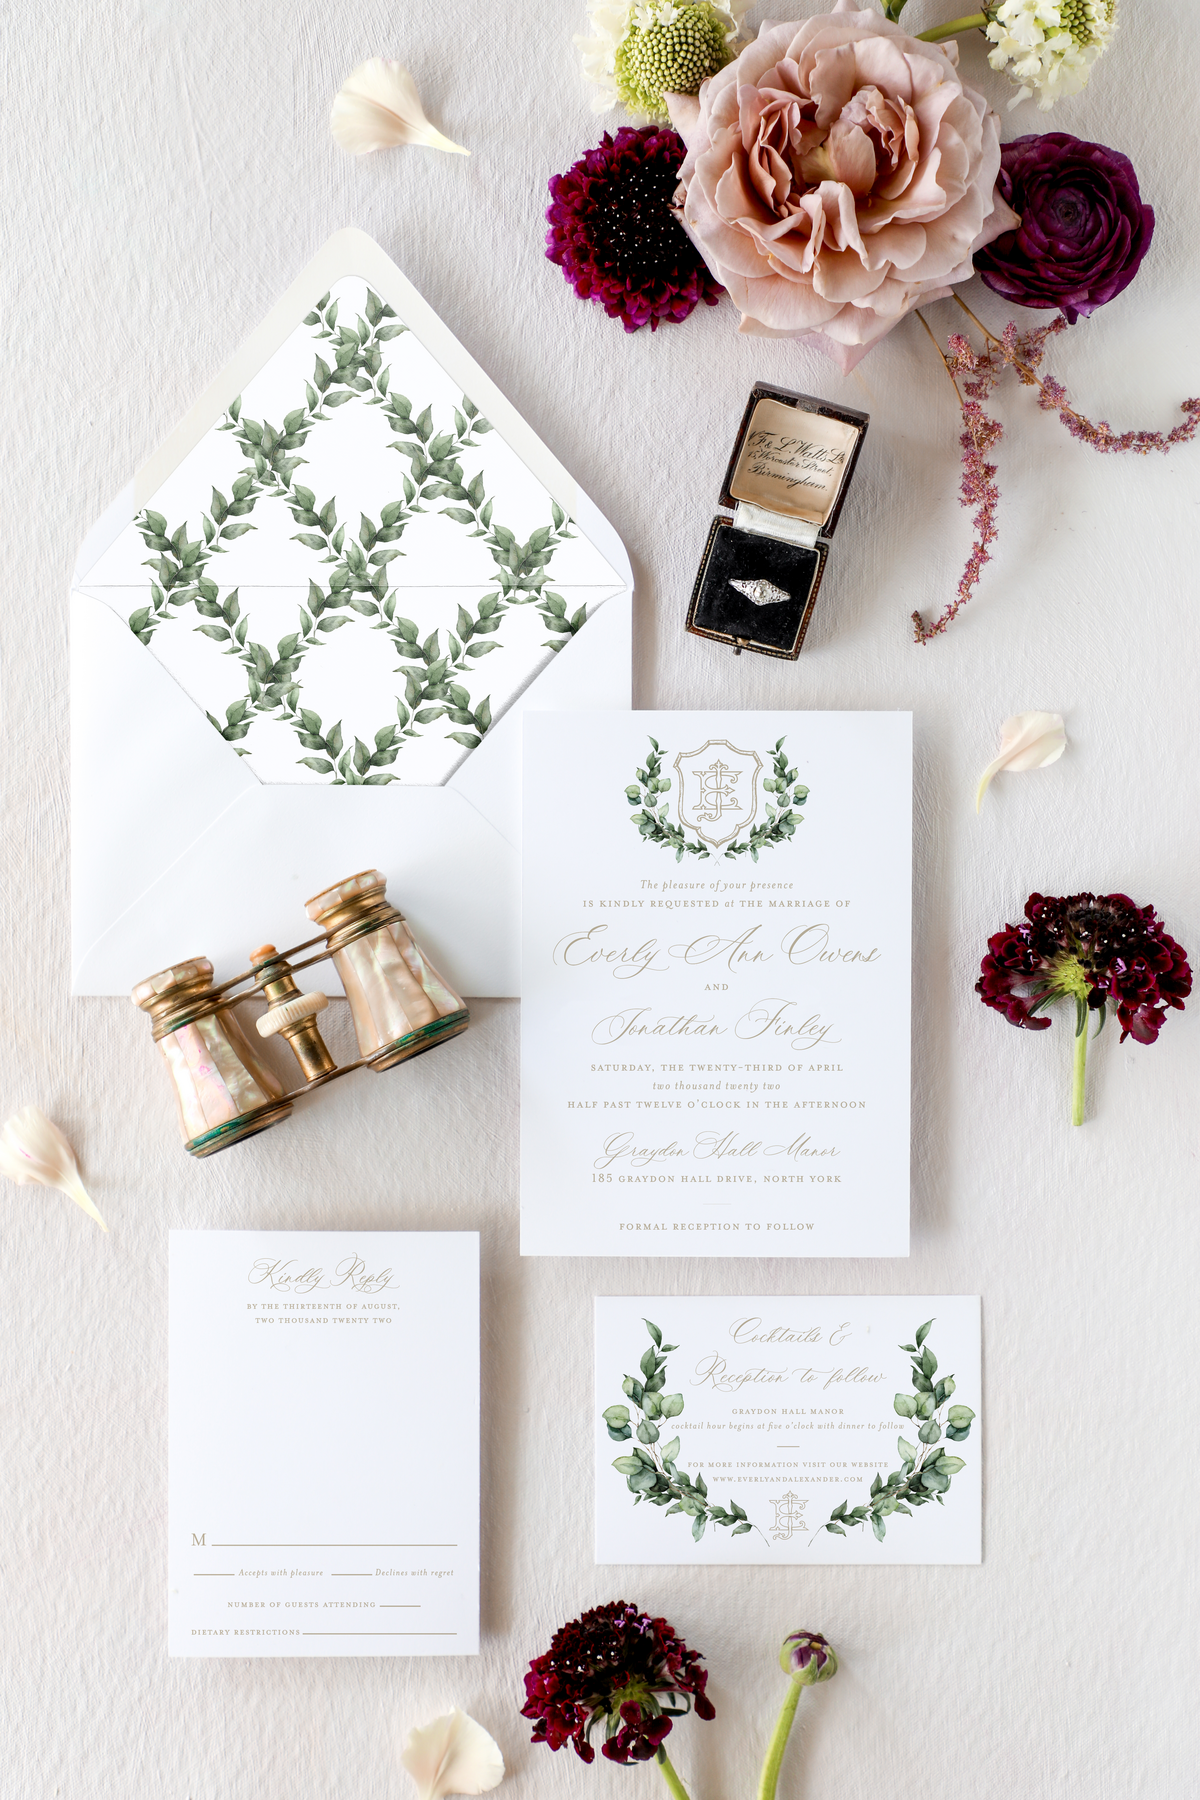 Wedding invitation set with greenery wreath and printed envelope liner